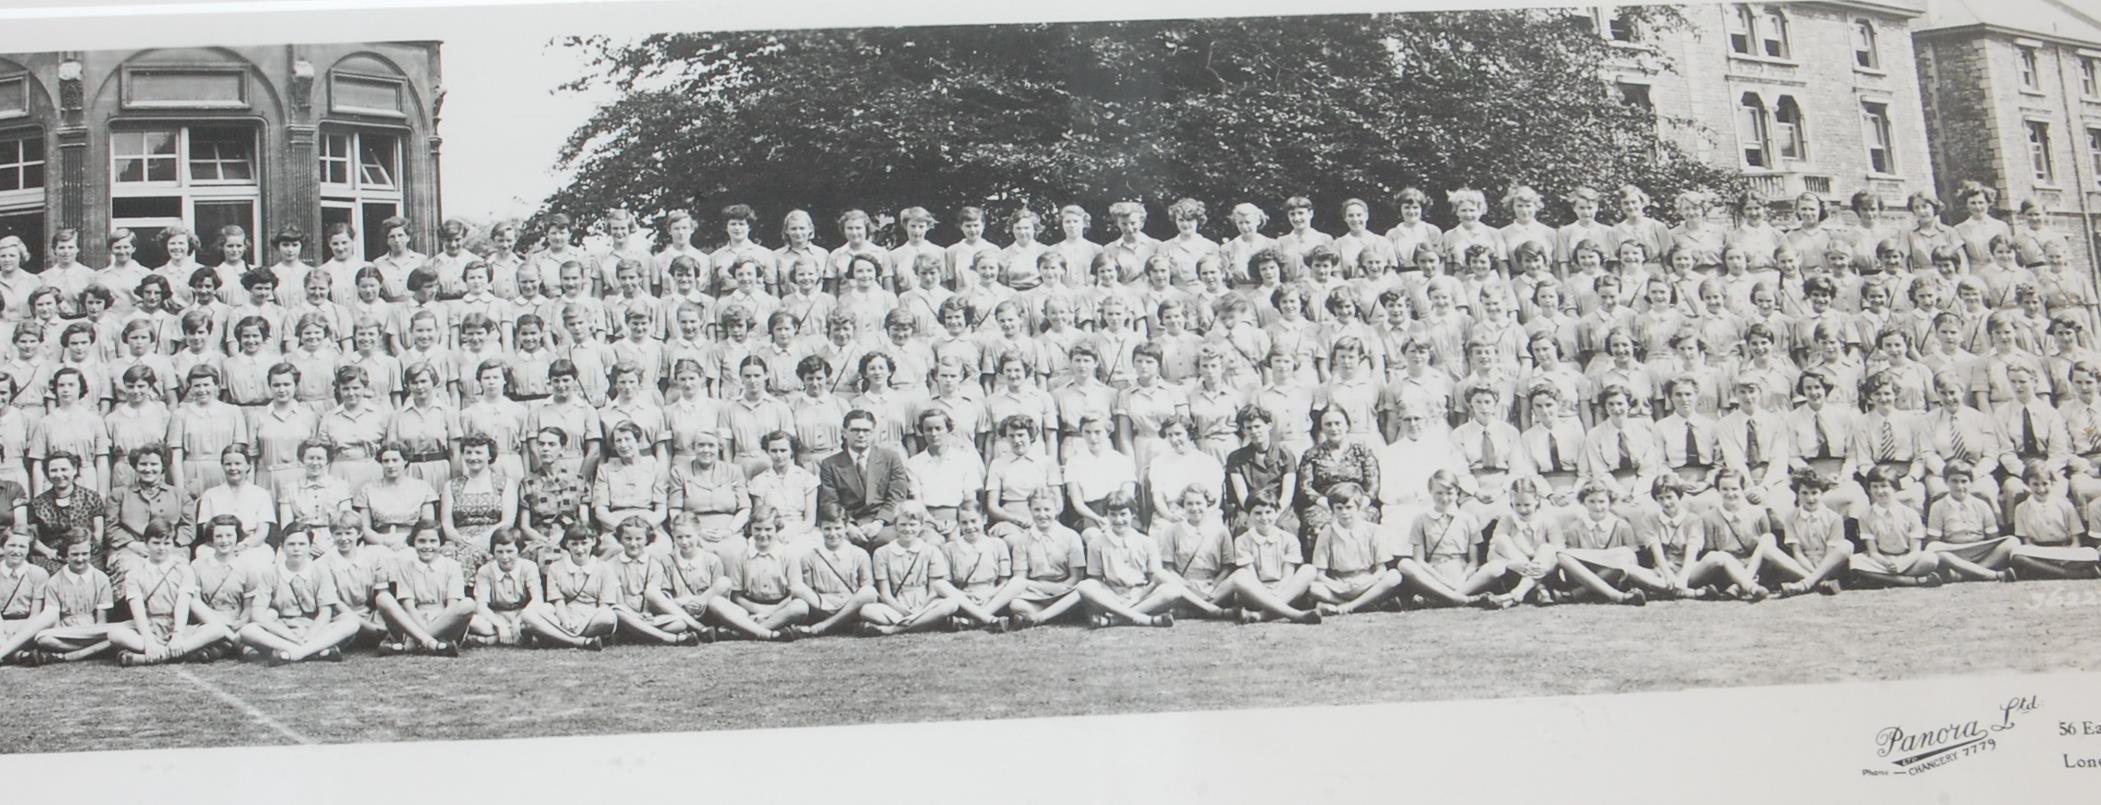 COOLECTION OF FOUR SCHOOL PHOTGRAPHS OF CLIFTON HIGH SCHOOL FOR GIRLS - Image 4 of 18